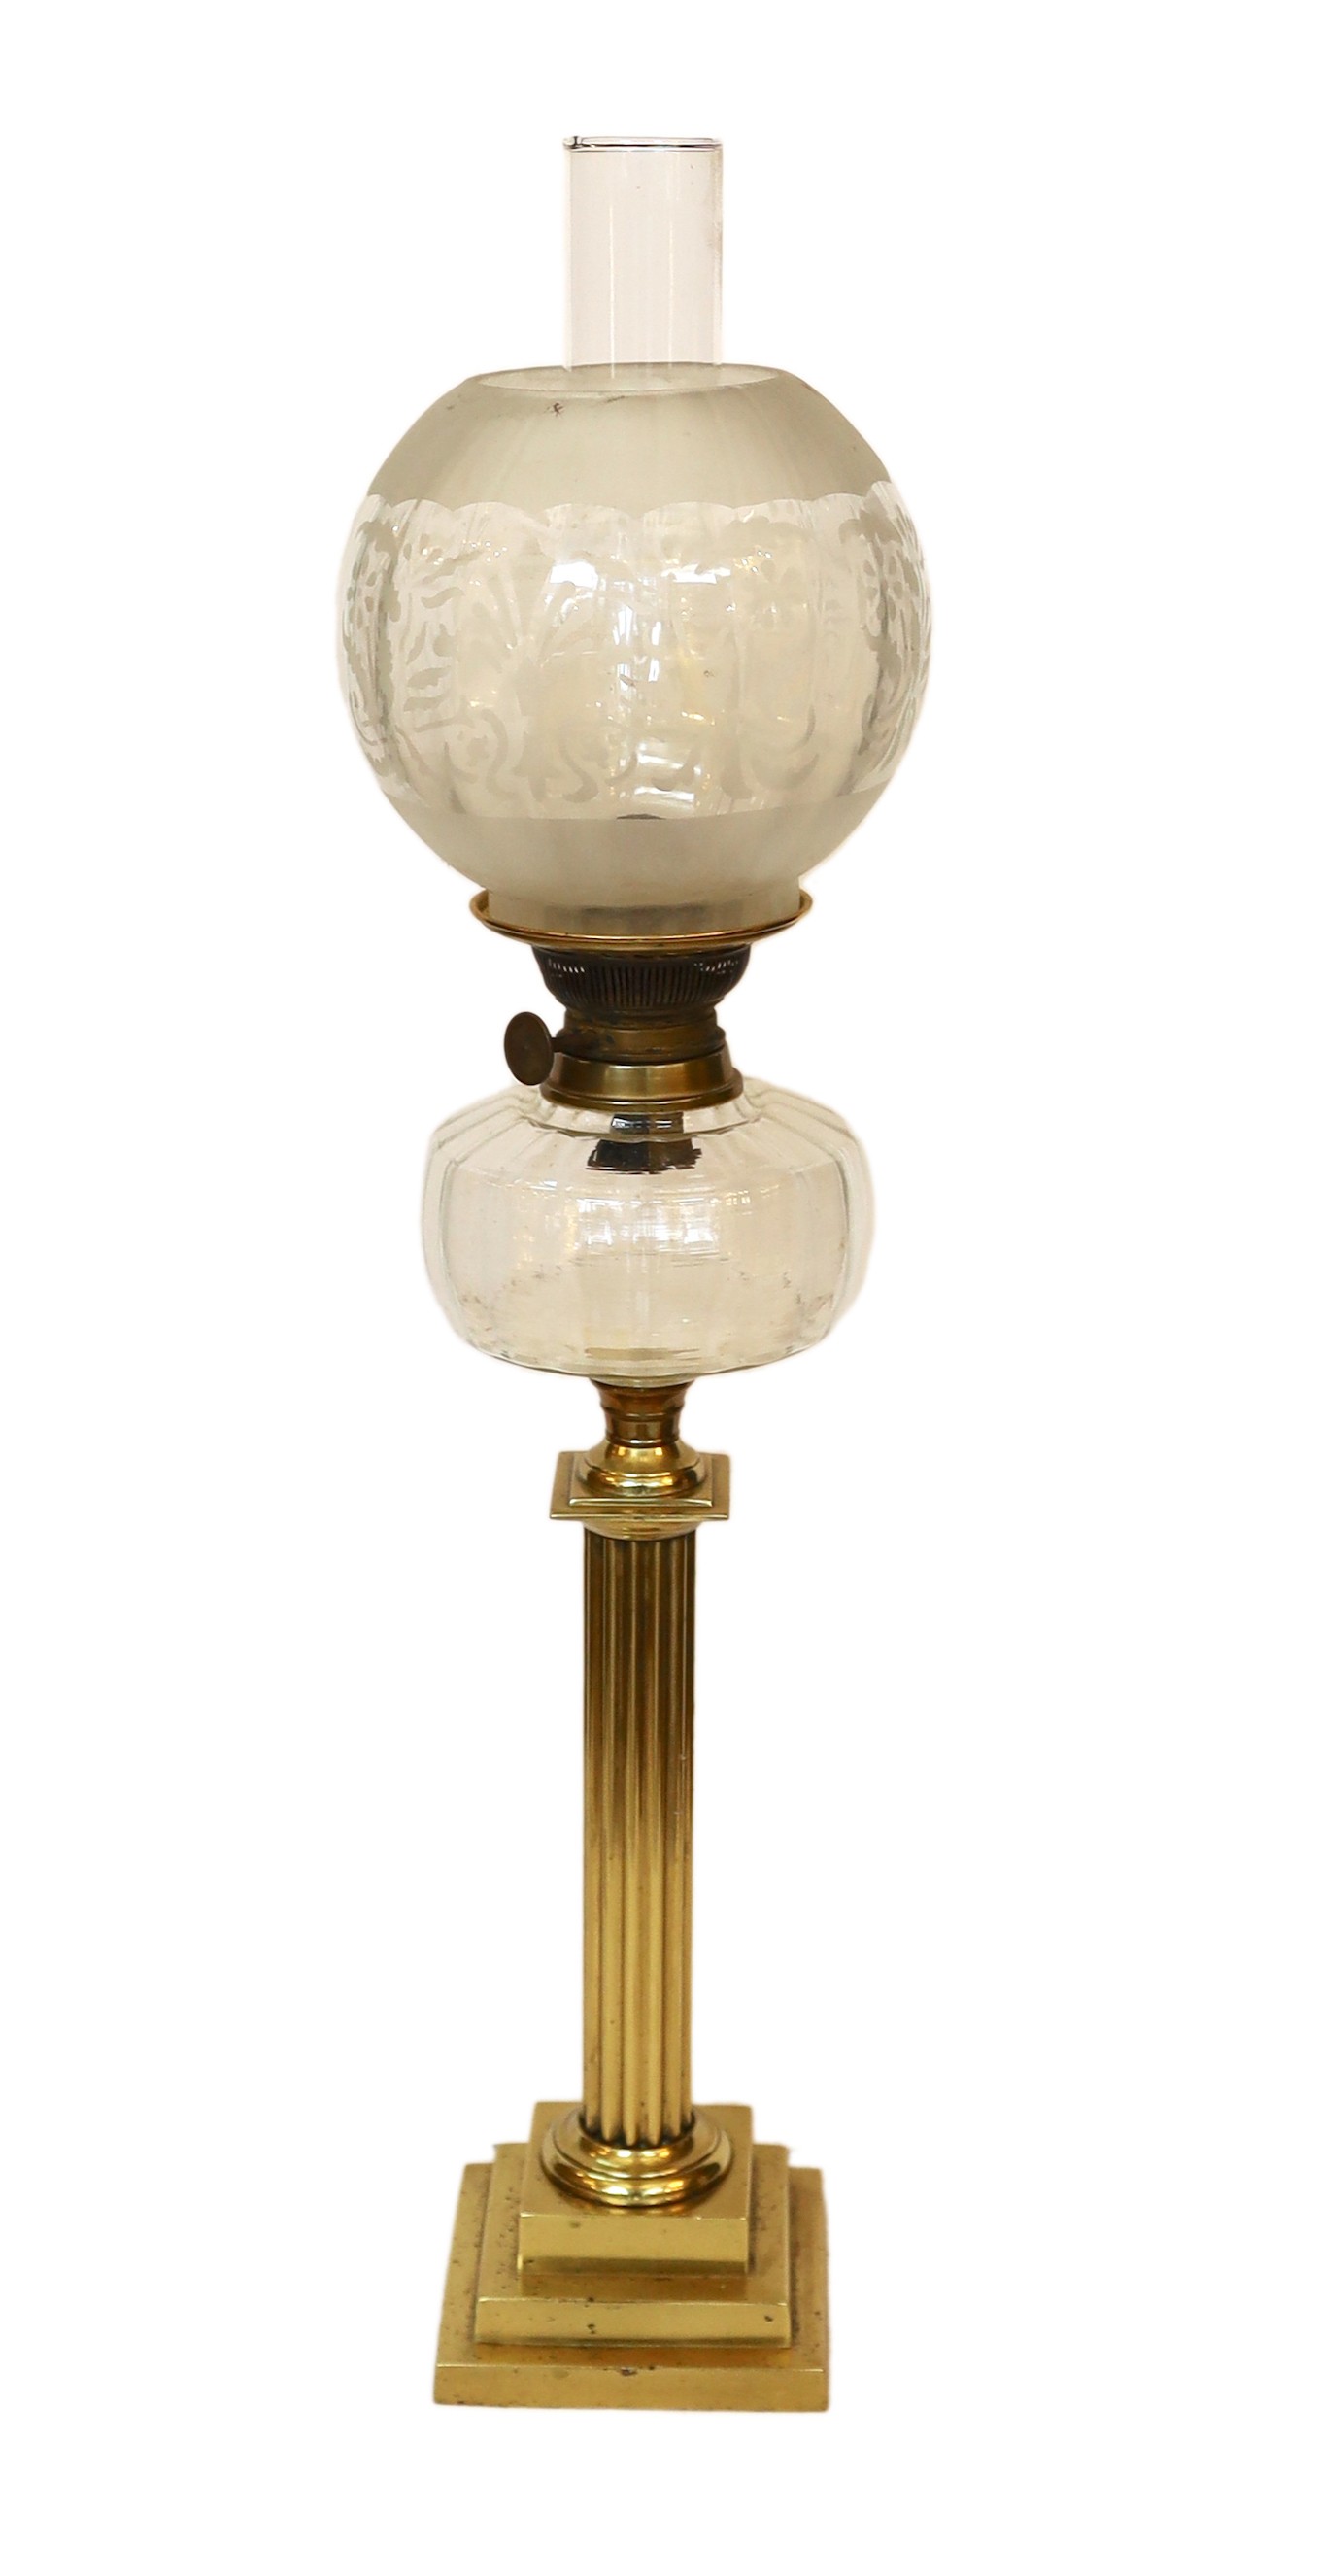 An Edwardian brass oil lamp with lobed glass reservoir, frosted globe and flue, height overall 74cm